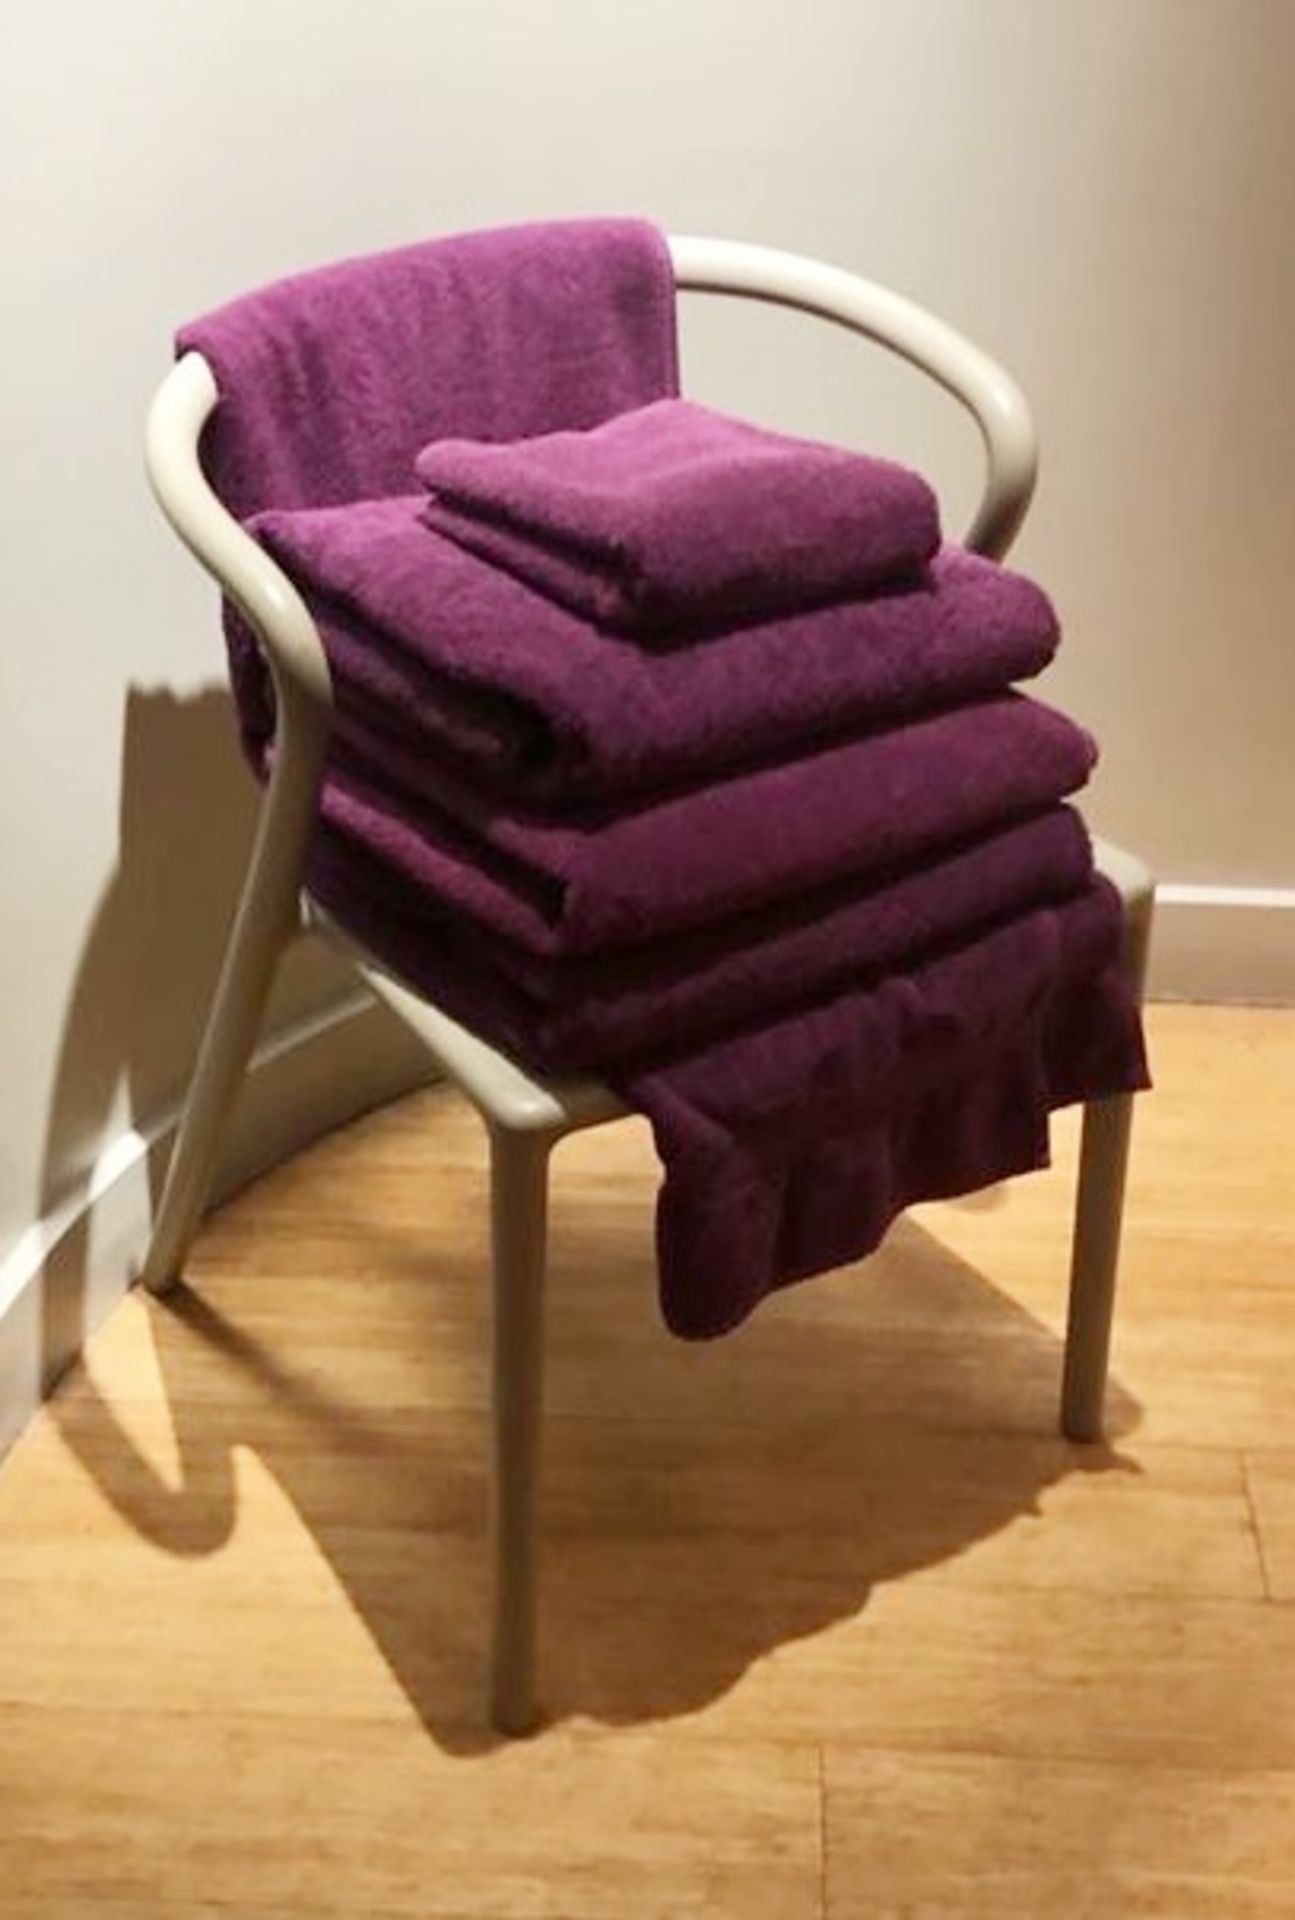 20 x Majestic Luxury 620gsm Bath Towels in Purple - Size MEDIUM - RRP £190 - CL587 - Location: - Image 3 of 4